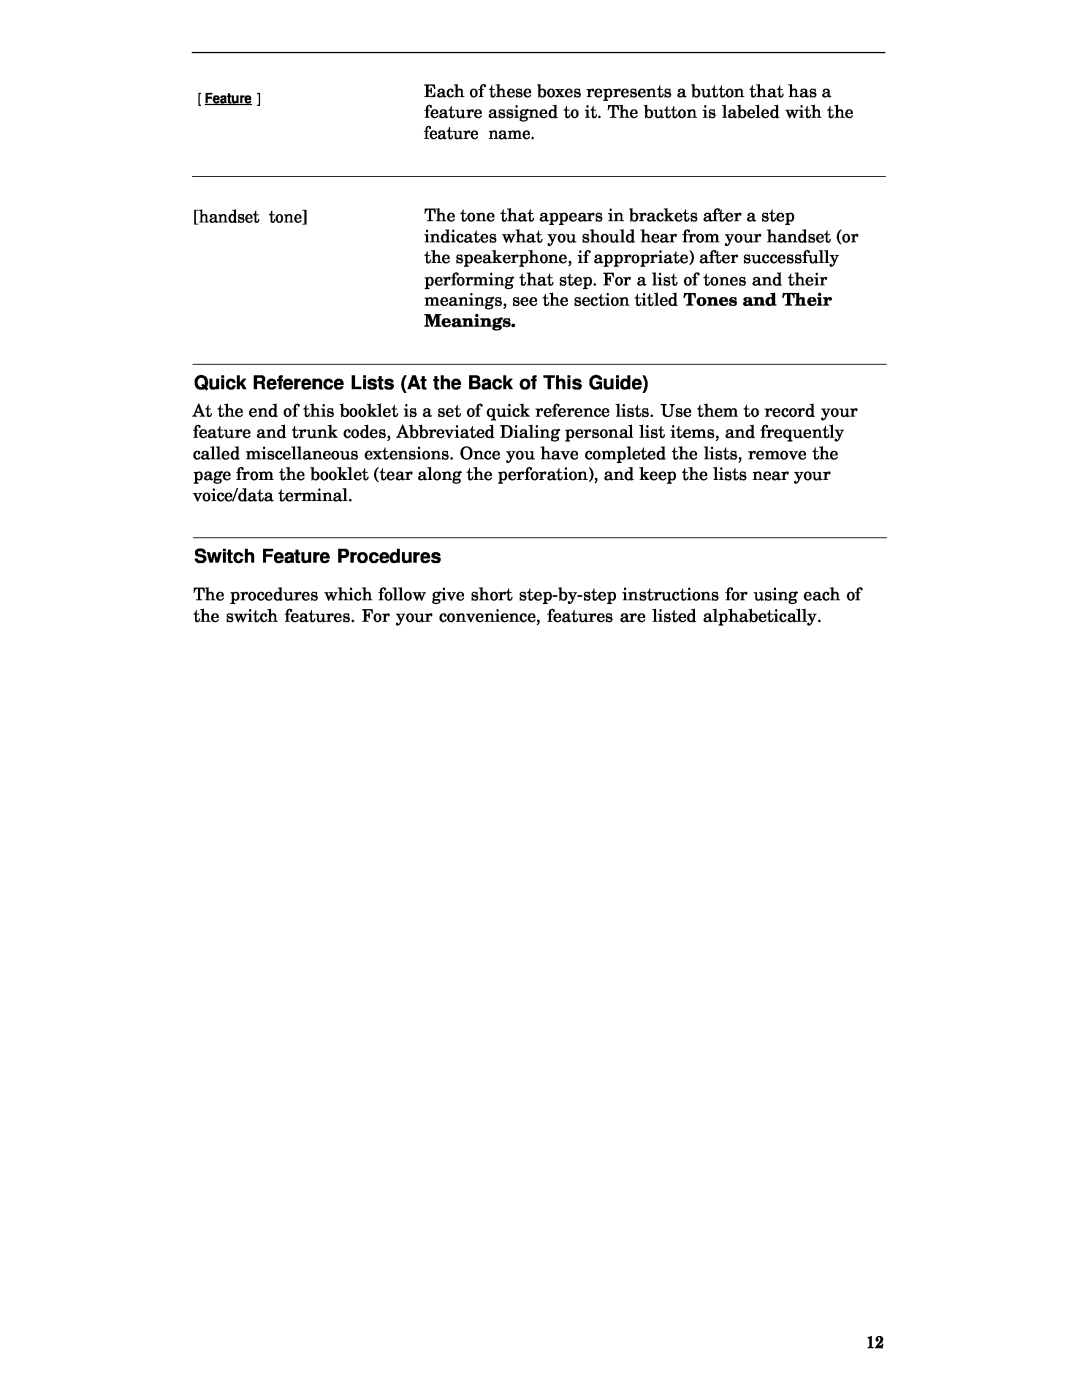 AT&T 8520T manual Quick Reference Lists At the Back of This Guide, Switch Feature Procedures, Meanings 